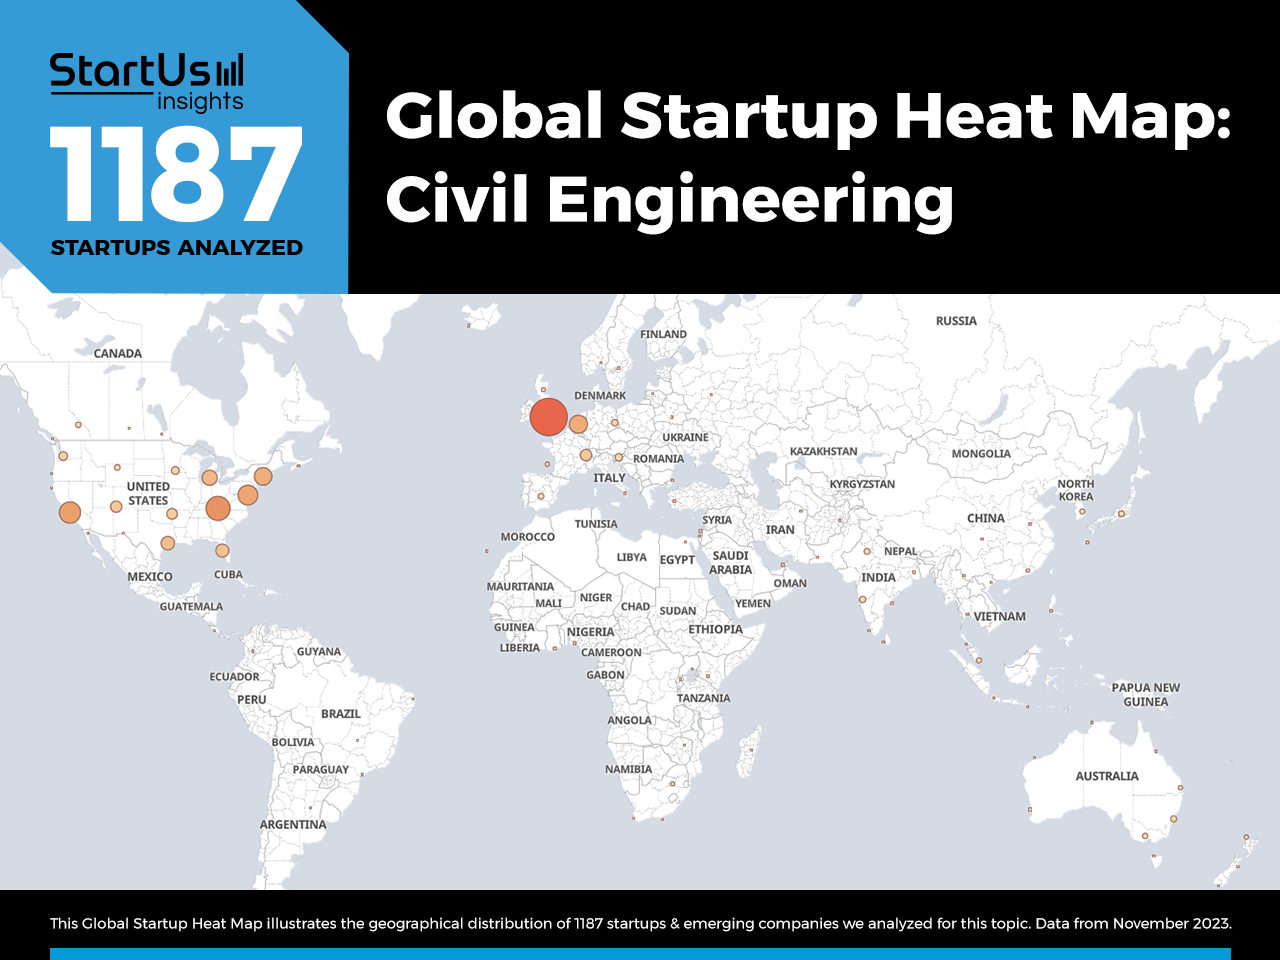 Civil-Engineering-Startups-TrendResearch-Heat-Map-StartUs-Insights-noresize